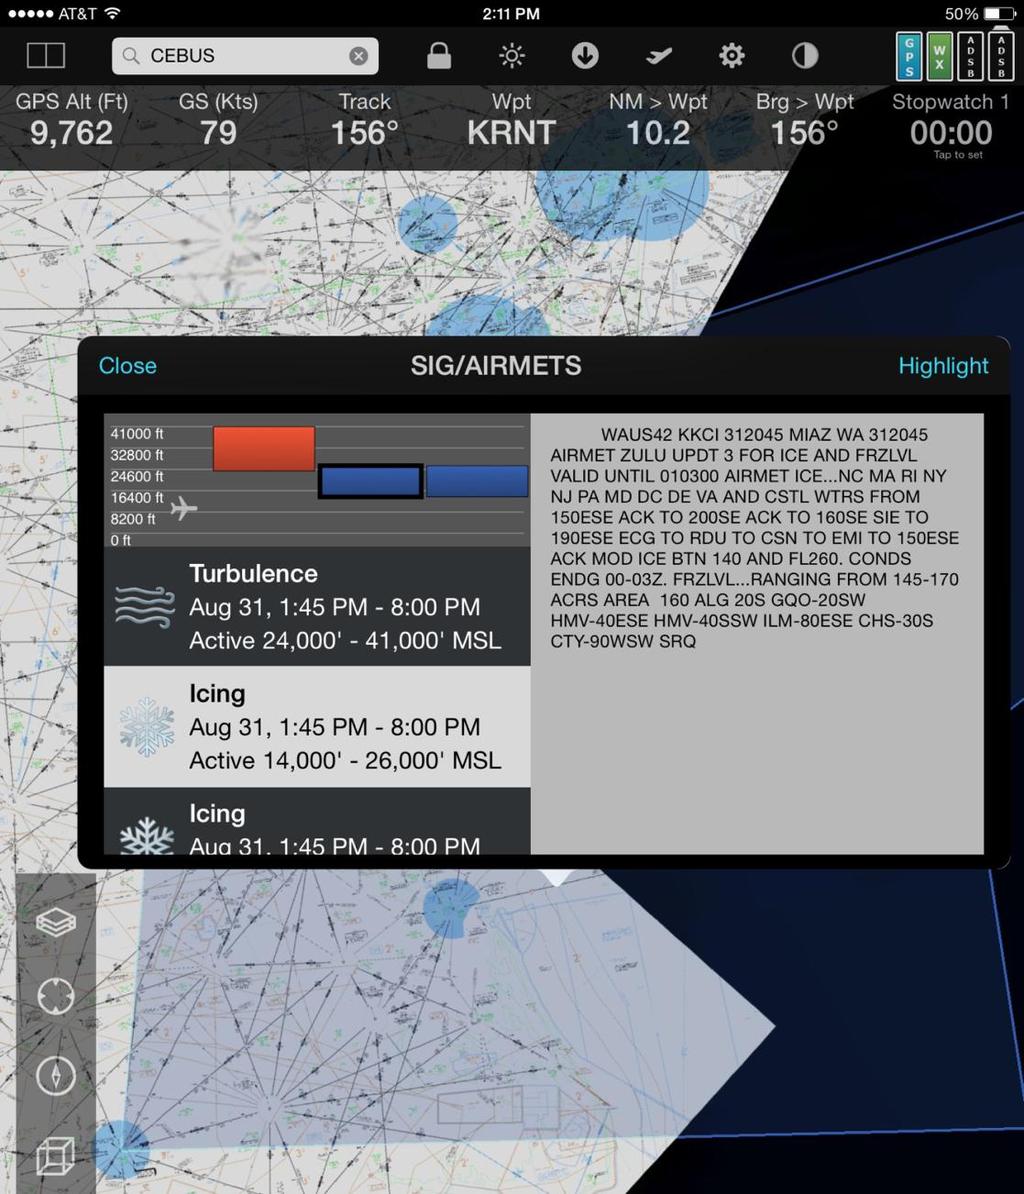 show either TFR info or METAR/TAF info. For safety reasons, when a TFR overlaps a METAR/TAF circle, we choose to show TFR information.